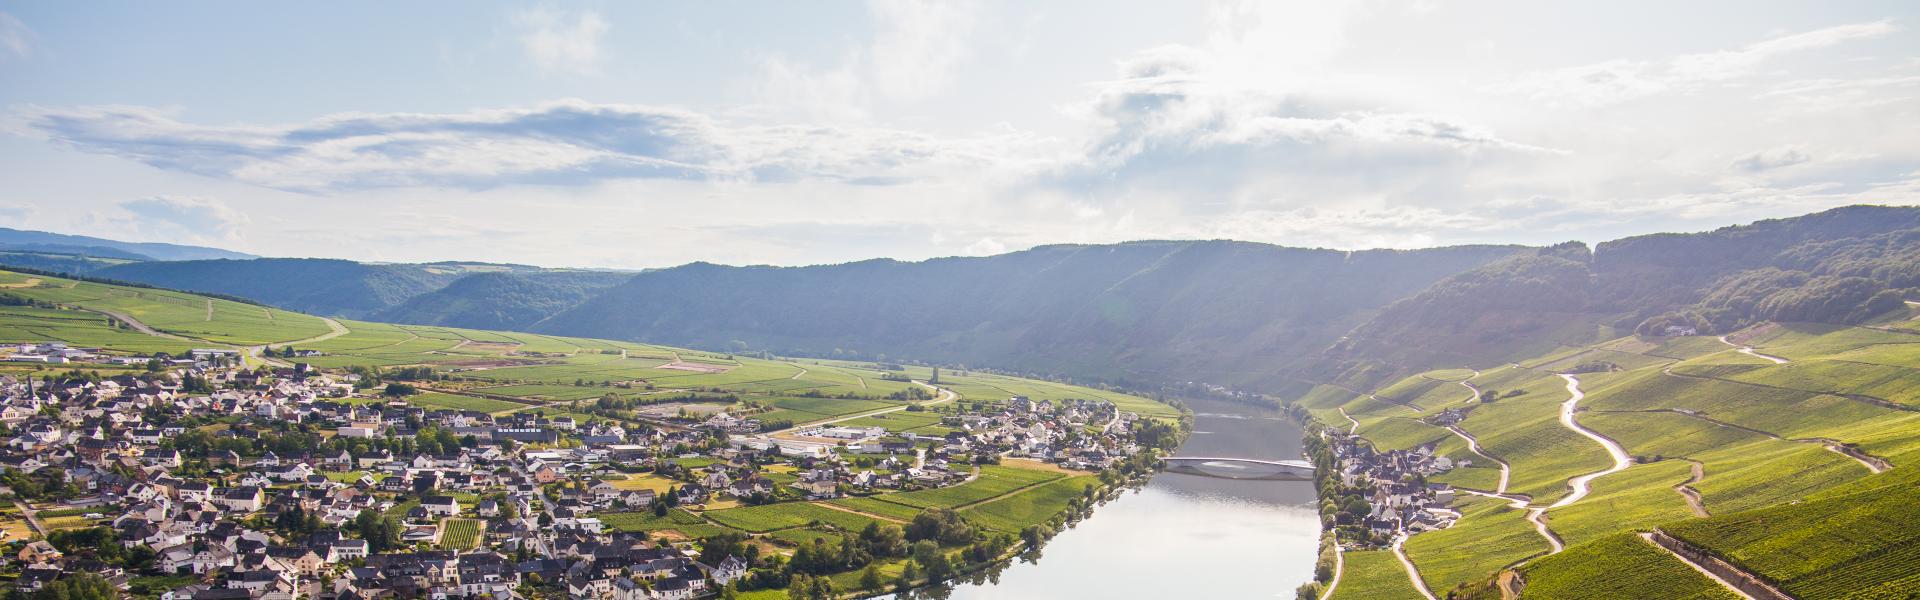 The Mosel Valley, located near Germany's western border, is home to several quaint villages that line the shores of the windy Mosel River, near Cochem, Germany